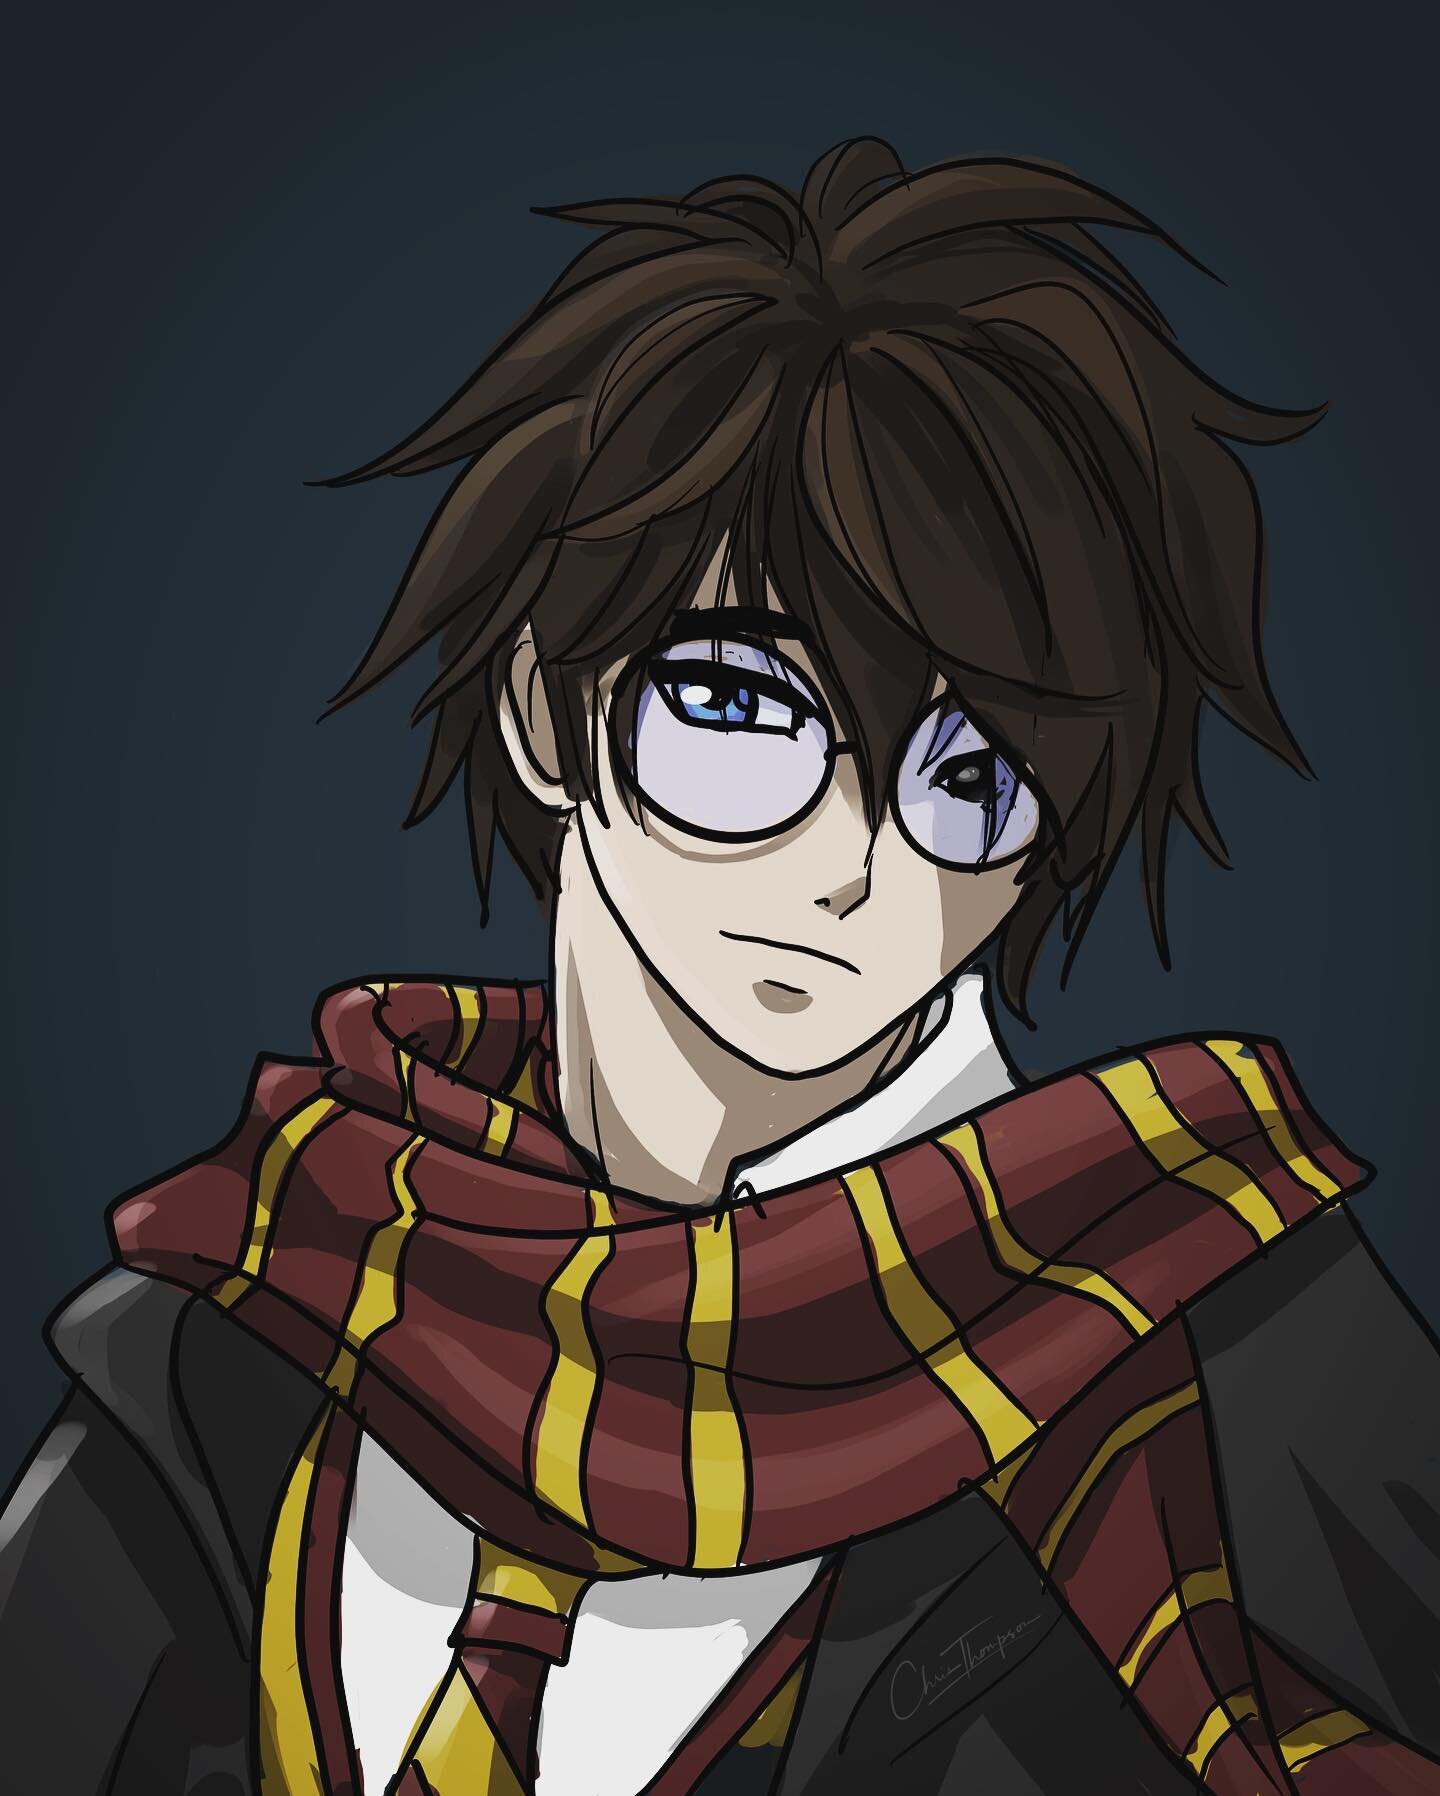 Someone challenged me to draw someone &ldquo;anime style&rdquo; after I was saying I&rsquo;m not a huge anime fan.  Challenge accepted!  I kind of like it! ⚡️ #harrypotter #animestyle #animechallenge